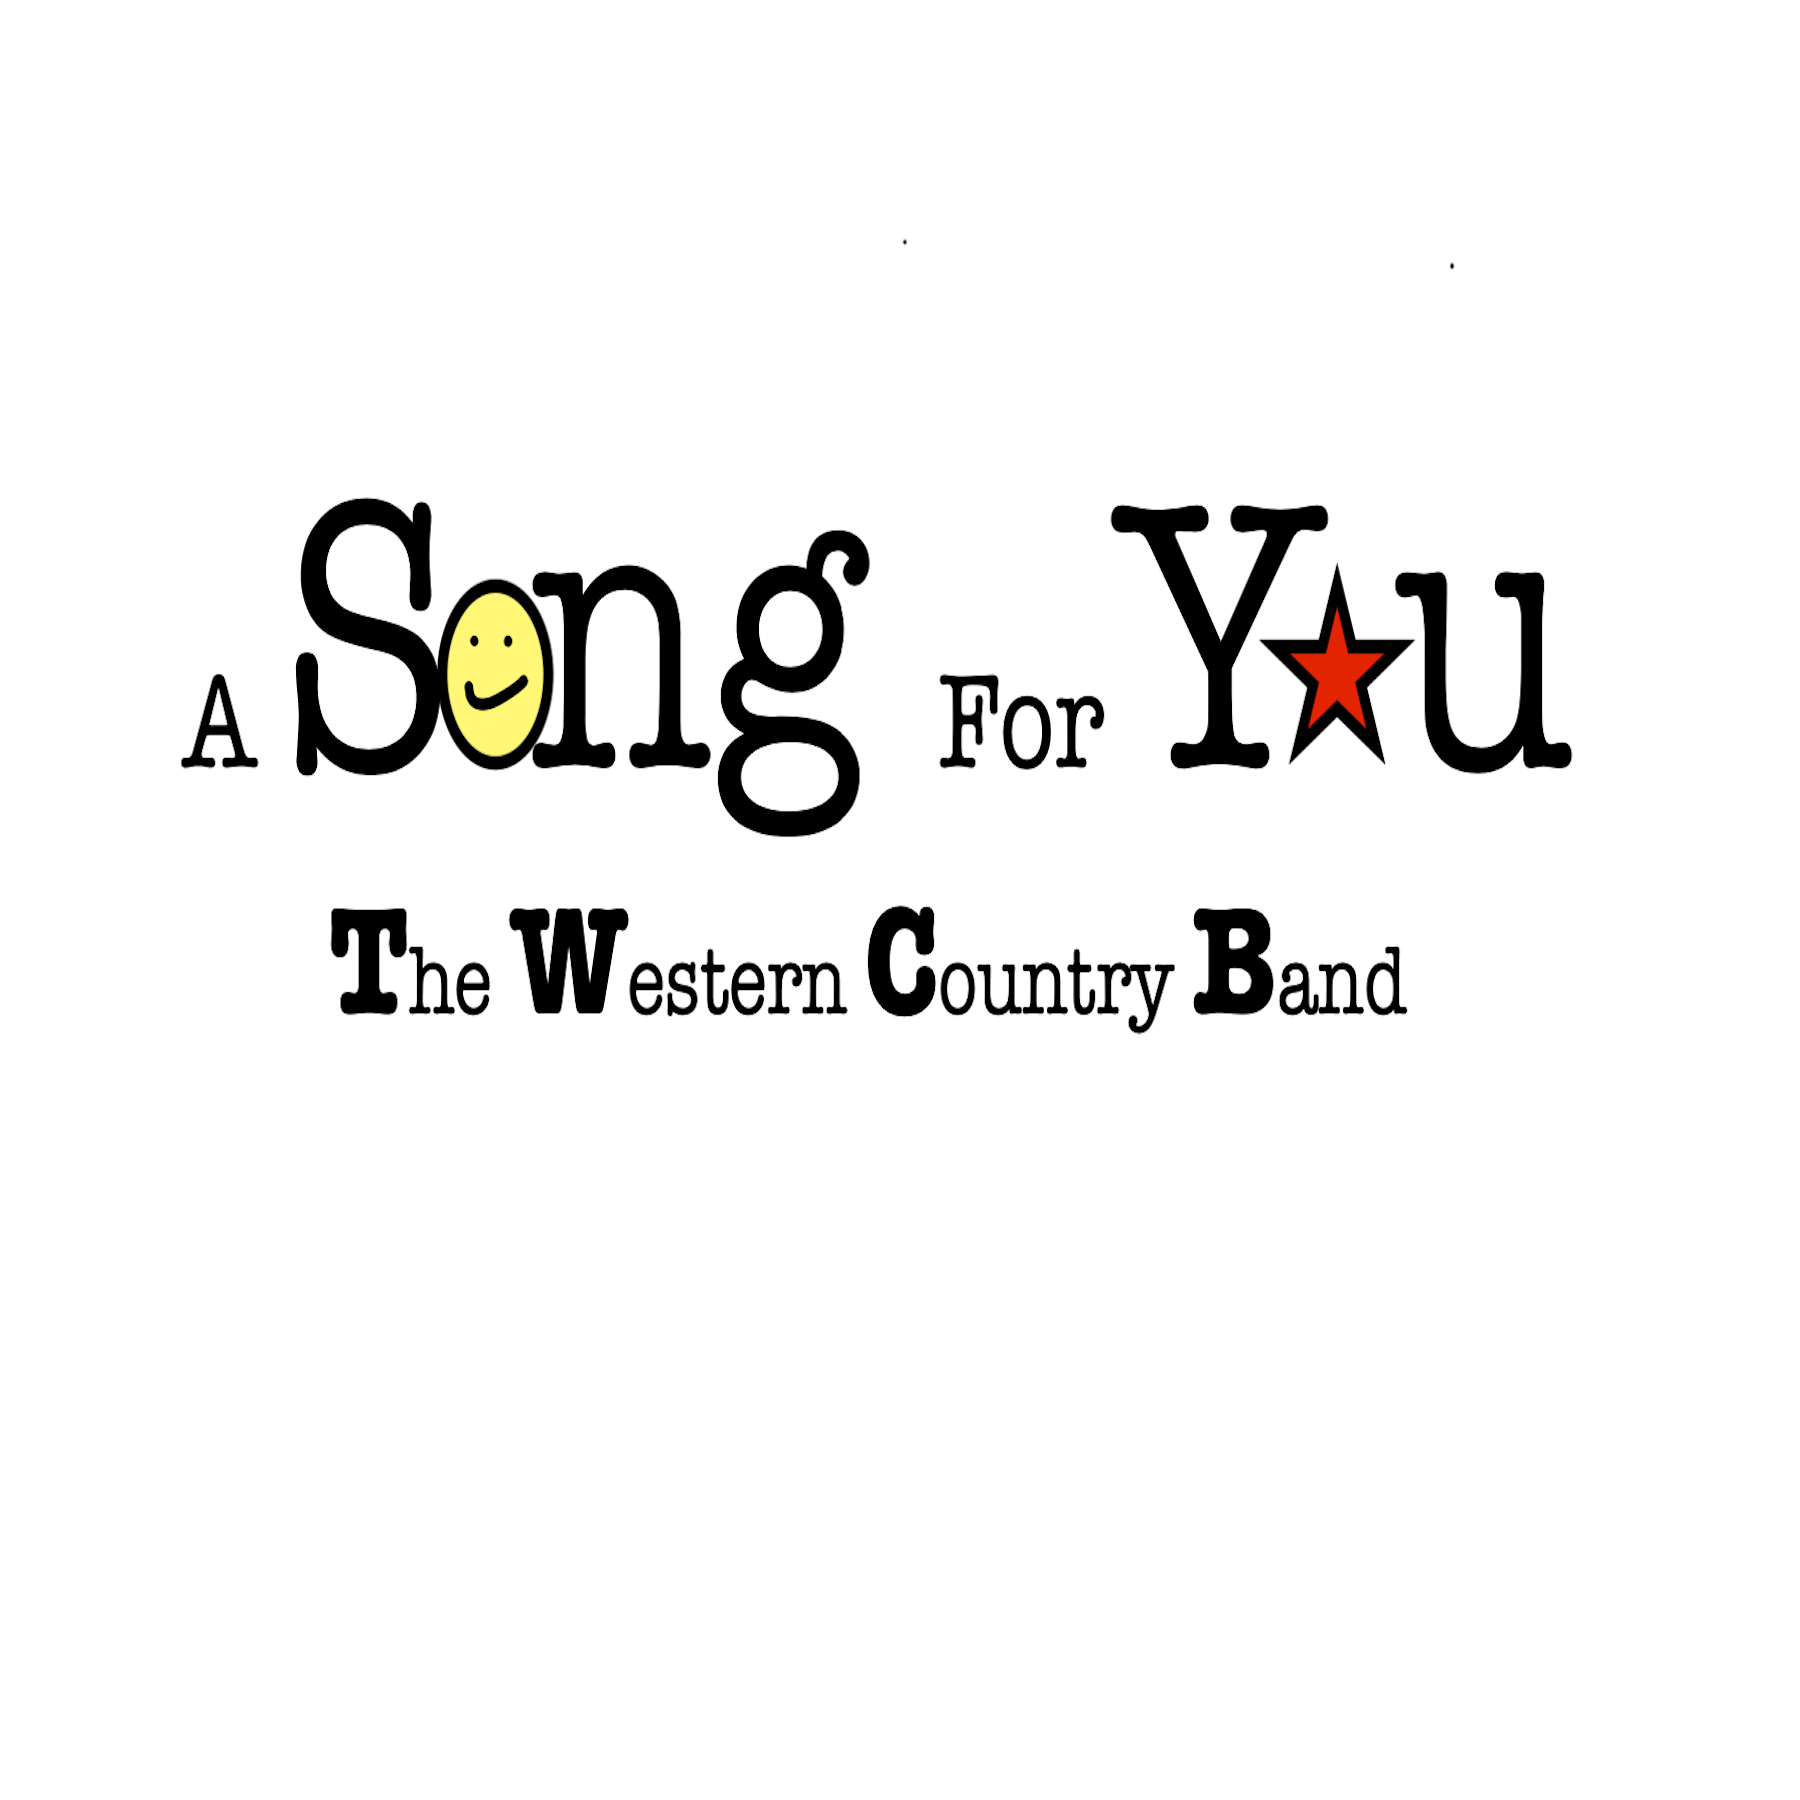 The Western Country Band - A Song For You